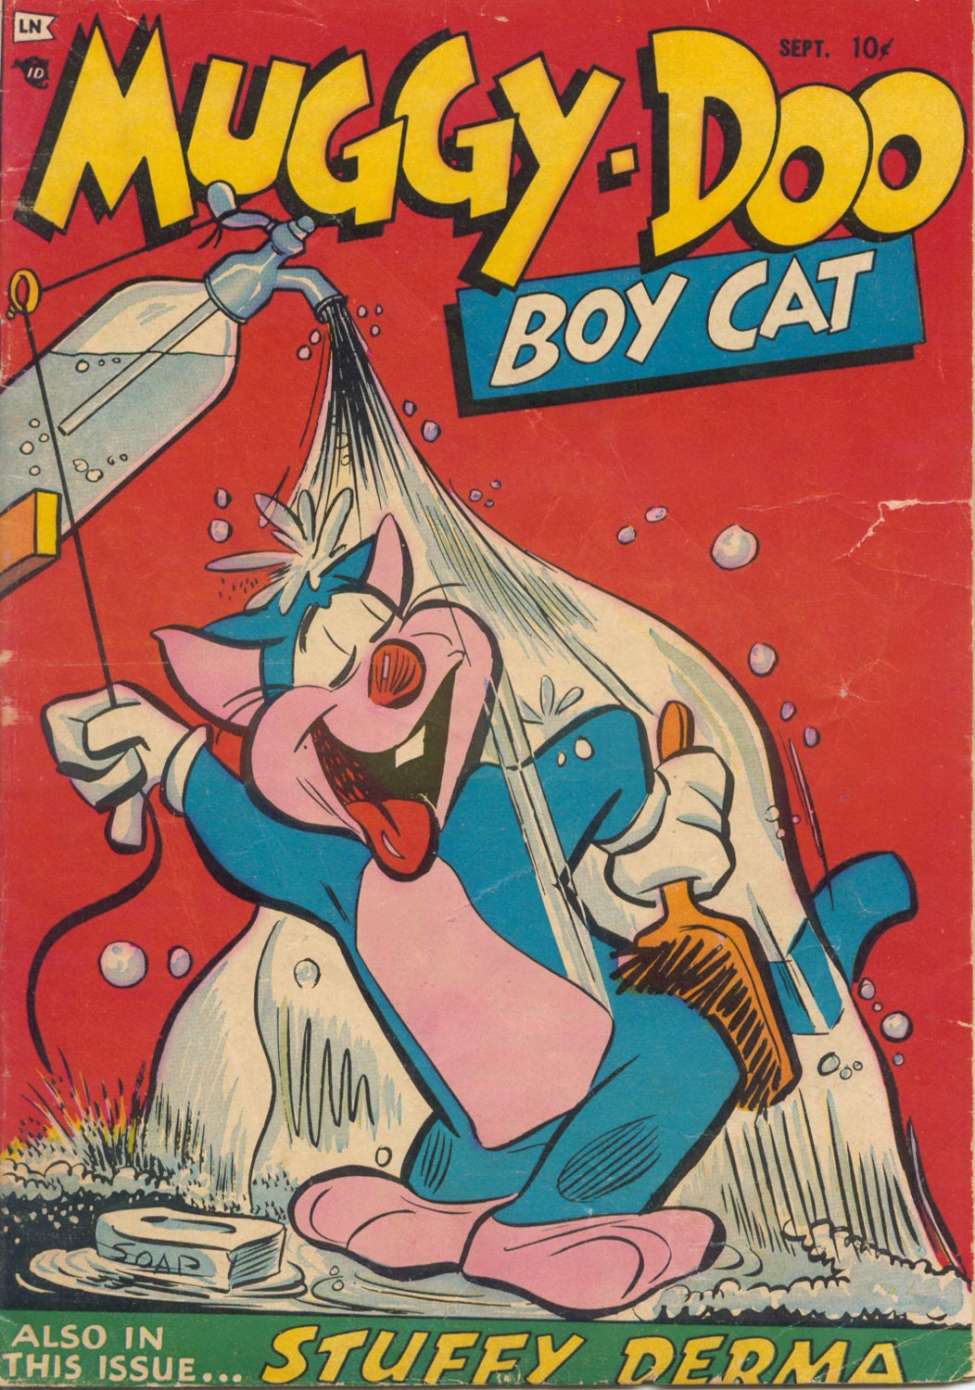 Book Cover For Muggy-Doo Boy Cat 2 (1 story)